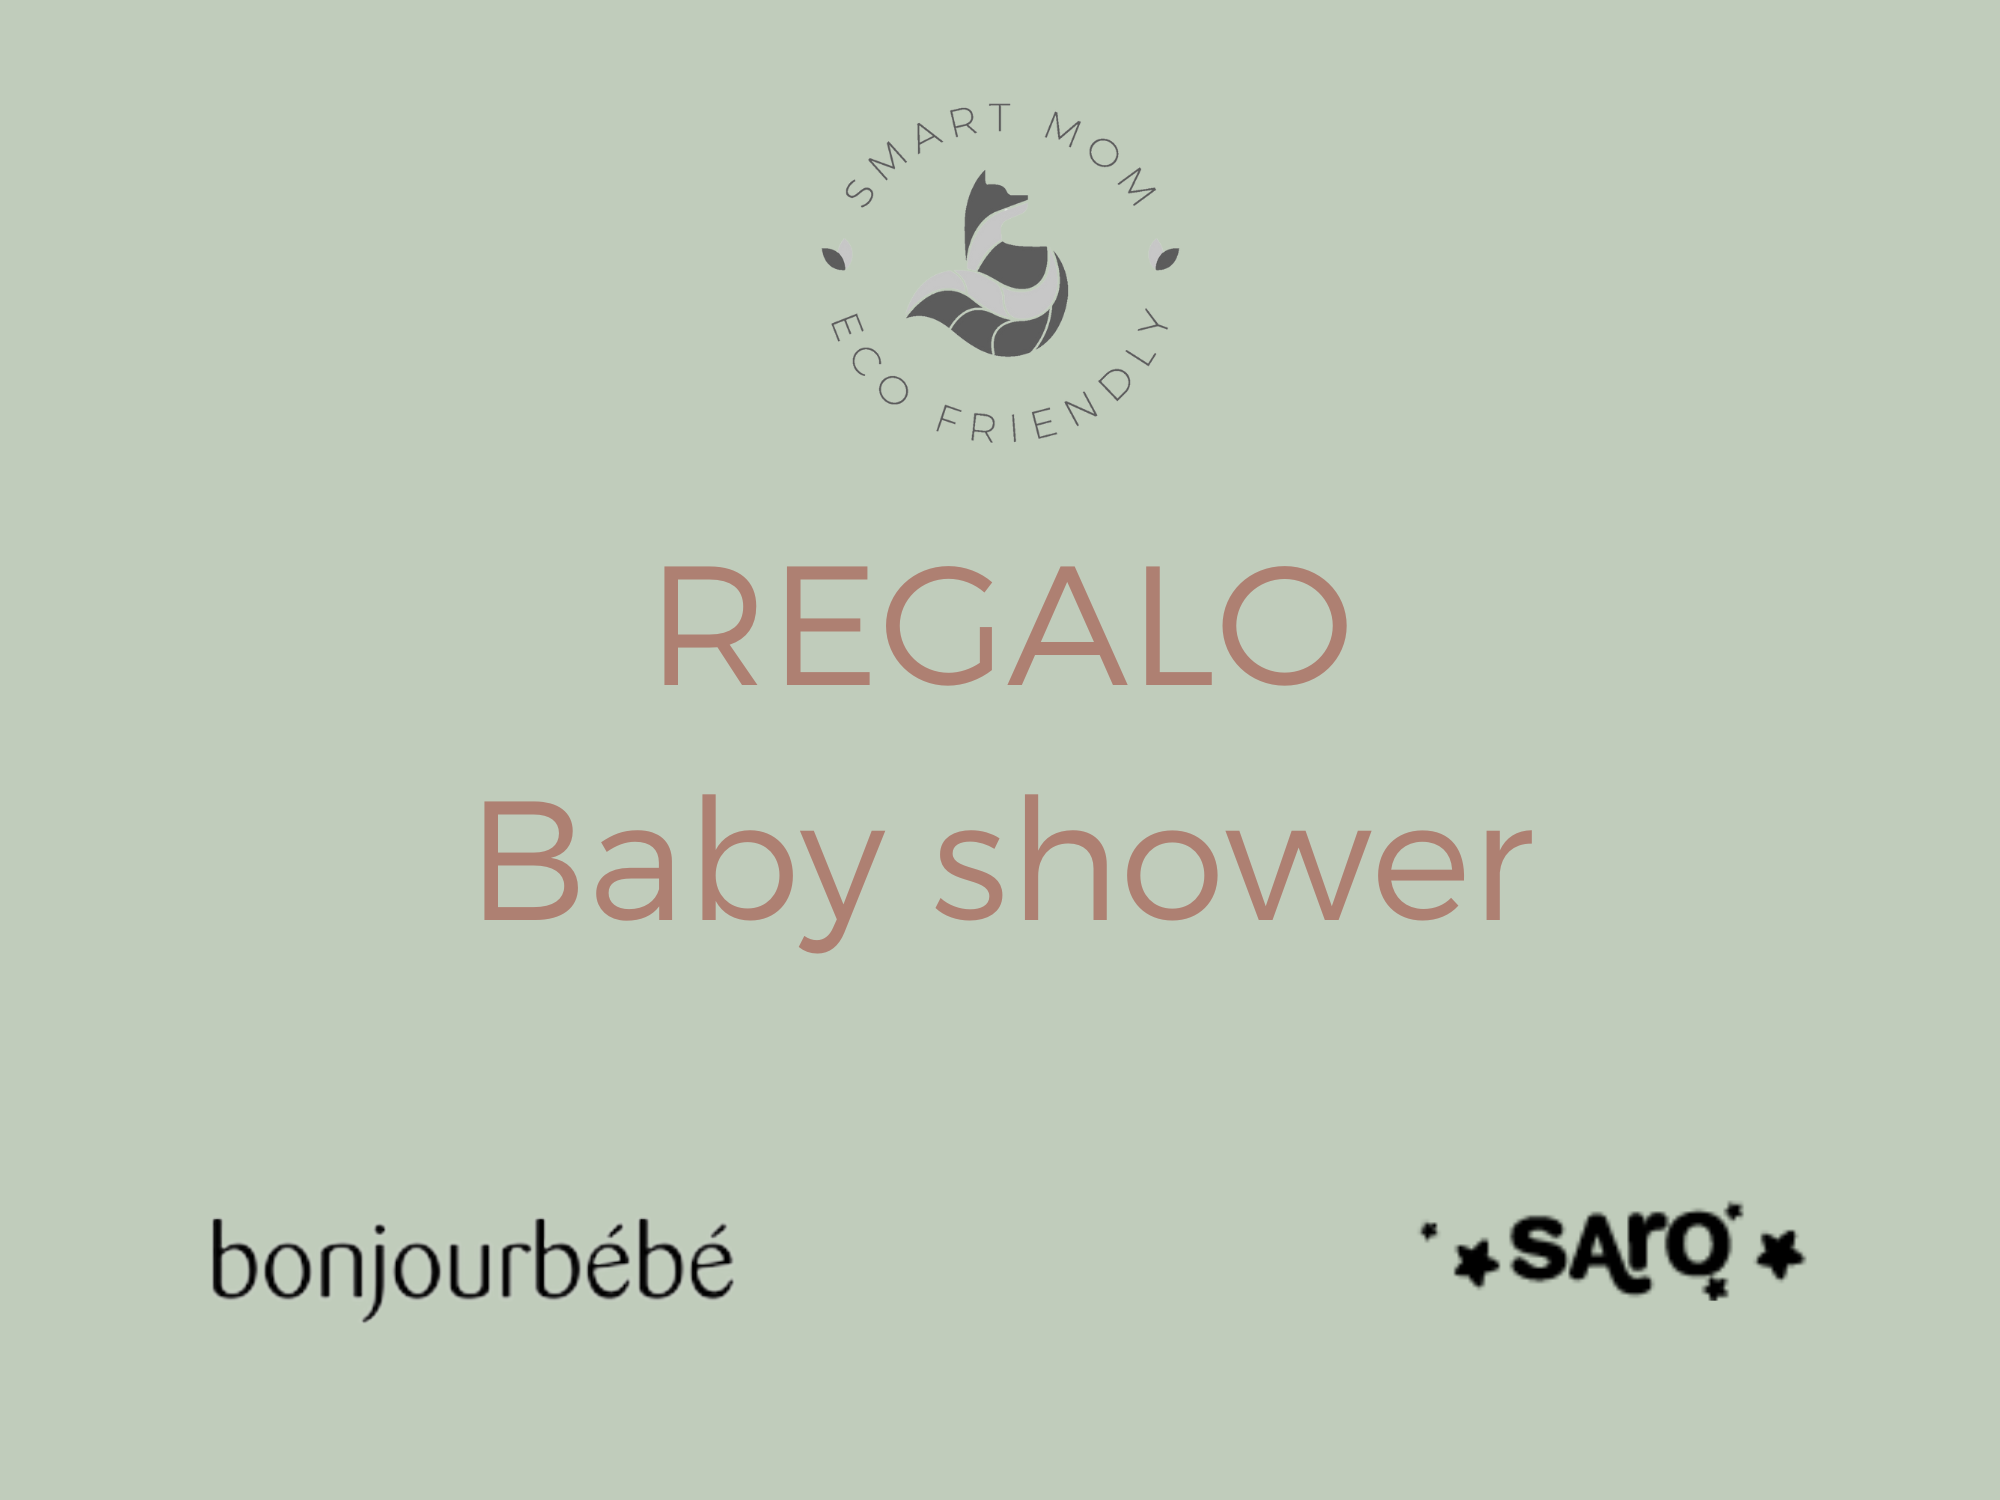 REGALO BABY SHOWER